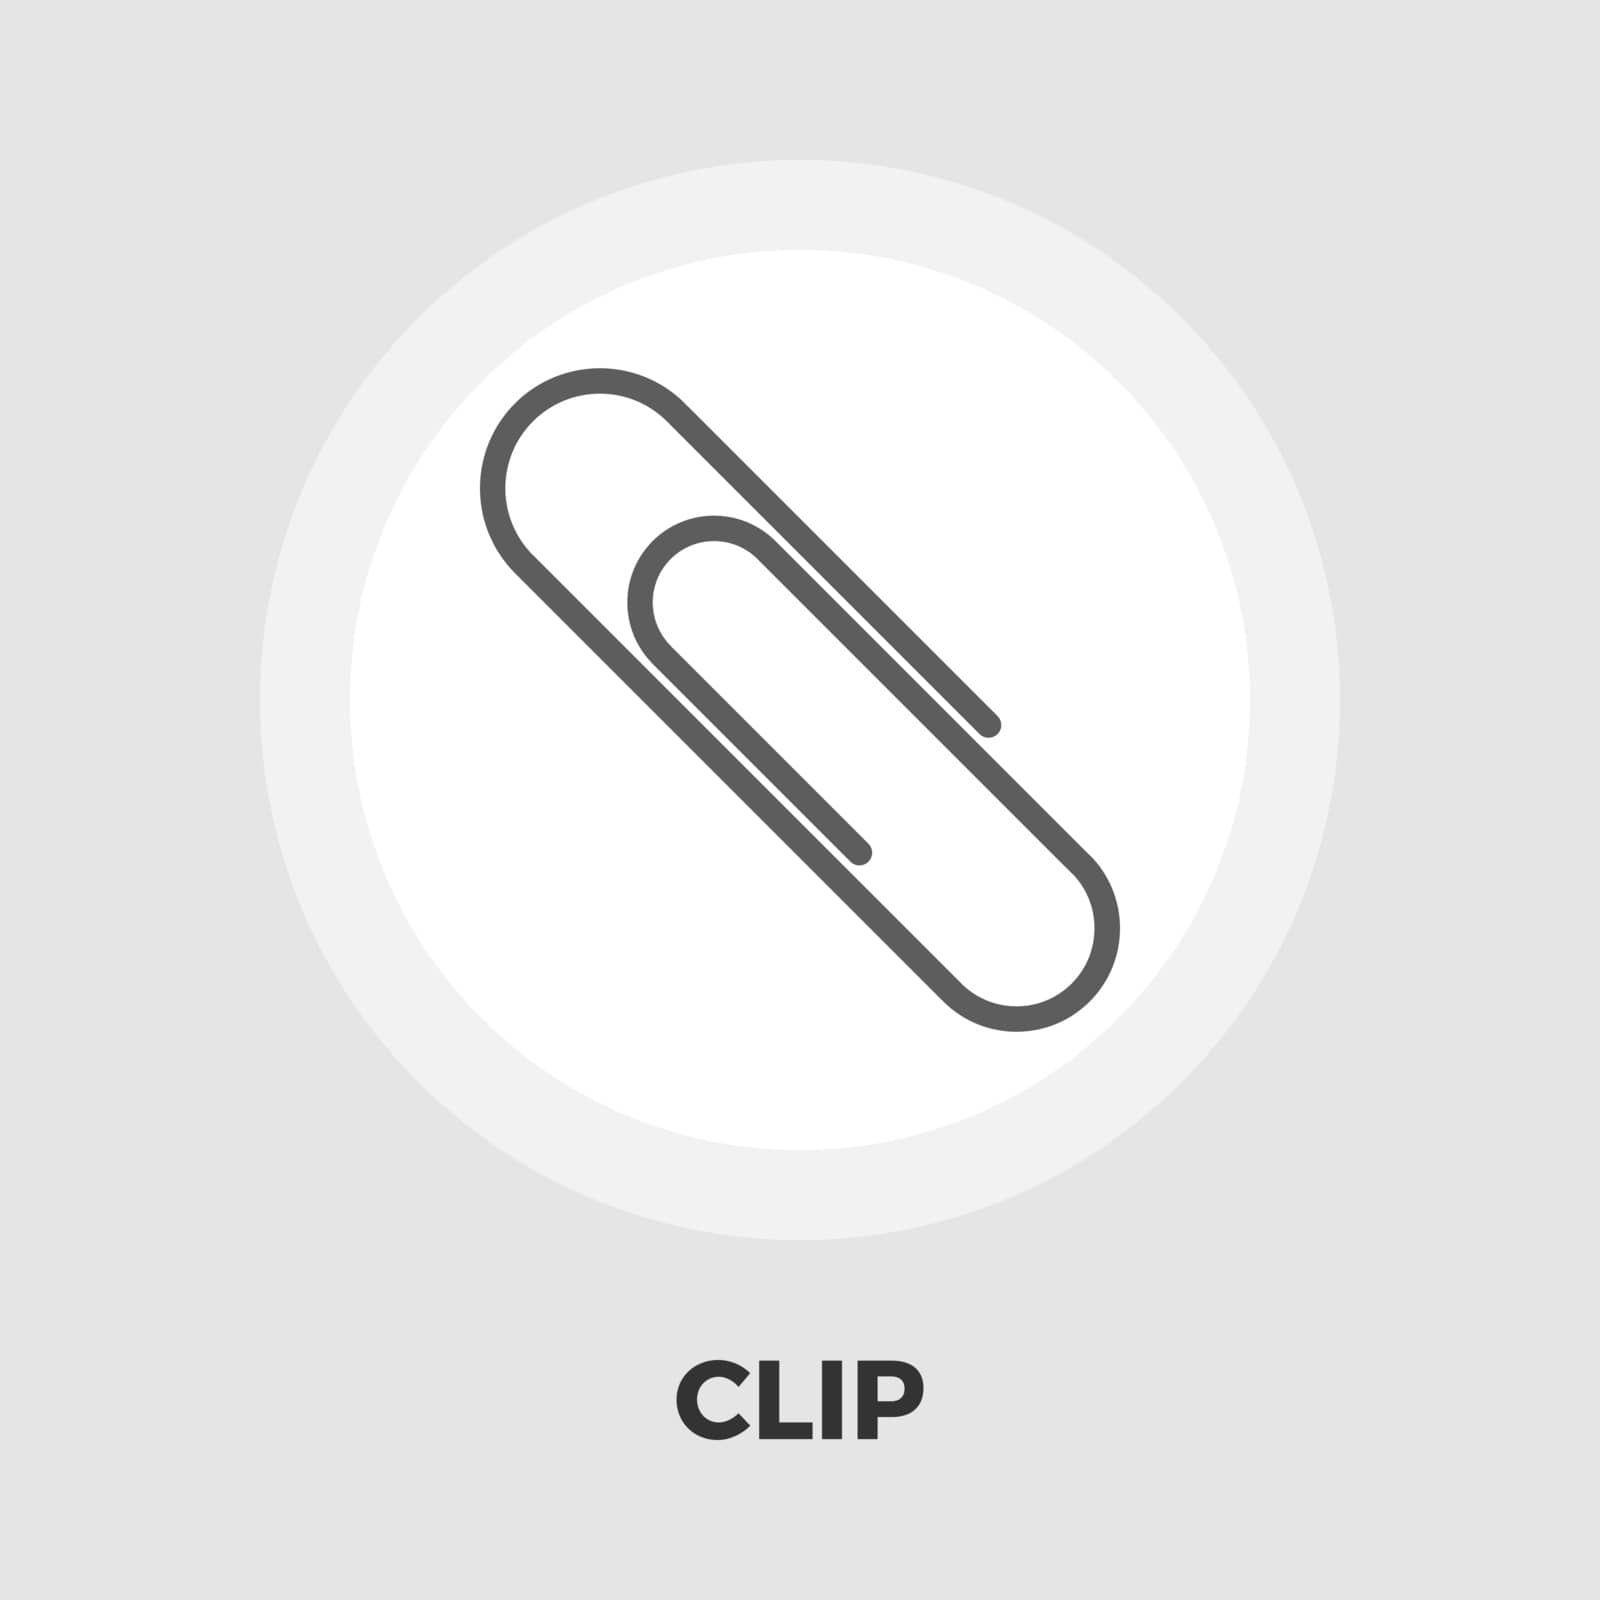 Clip icon vector. Flat icon isolated on the white background. Editable EPS file. Vector illustration.